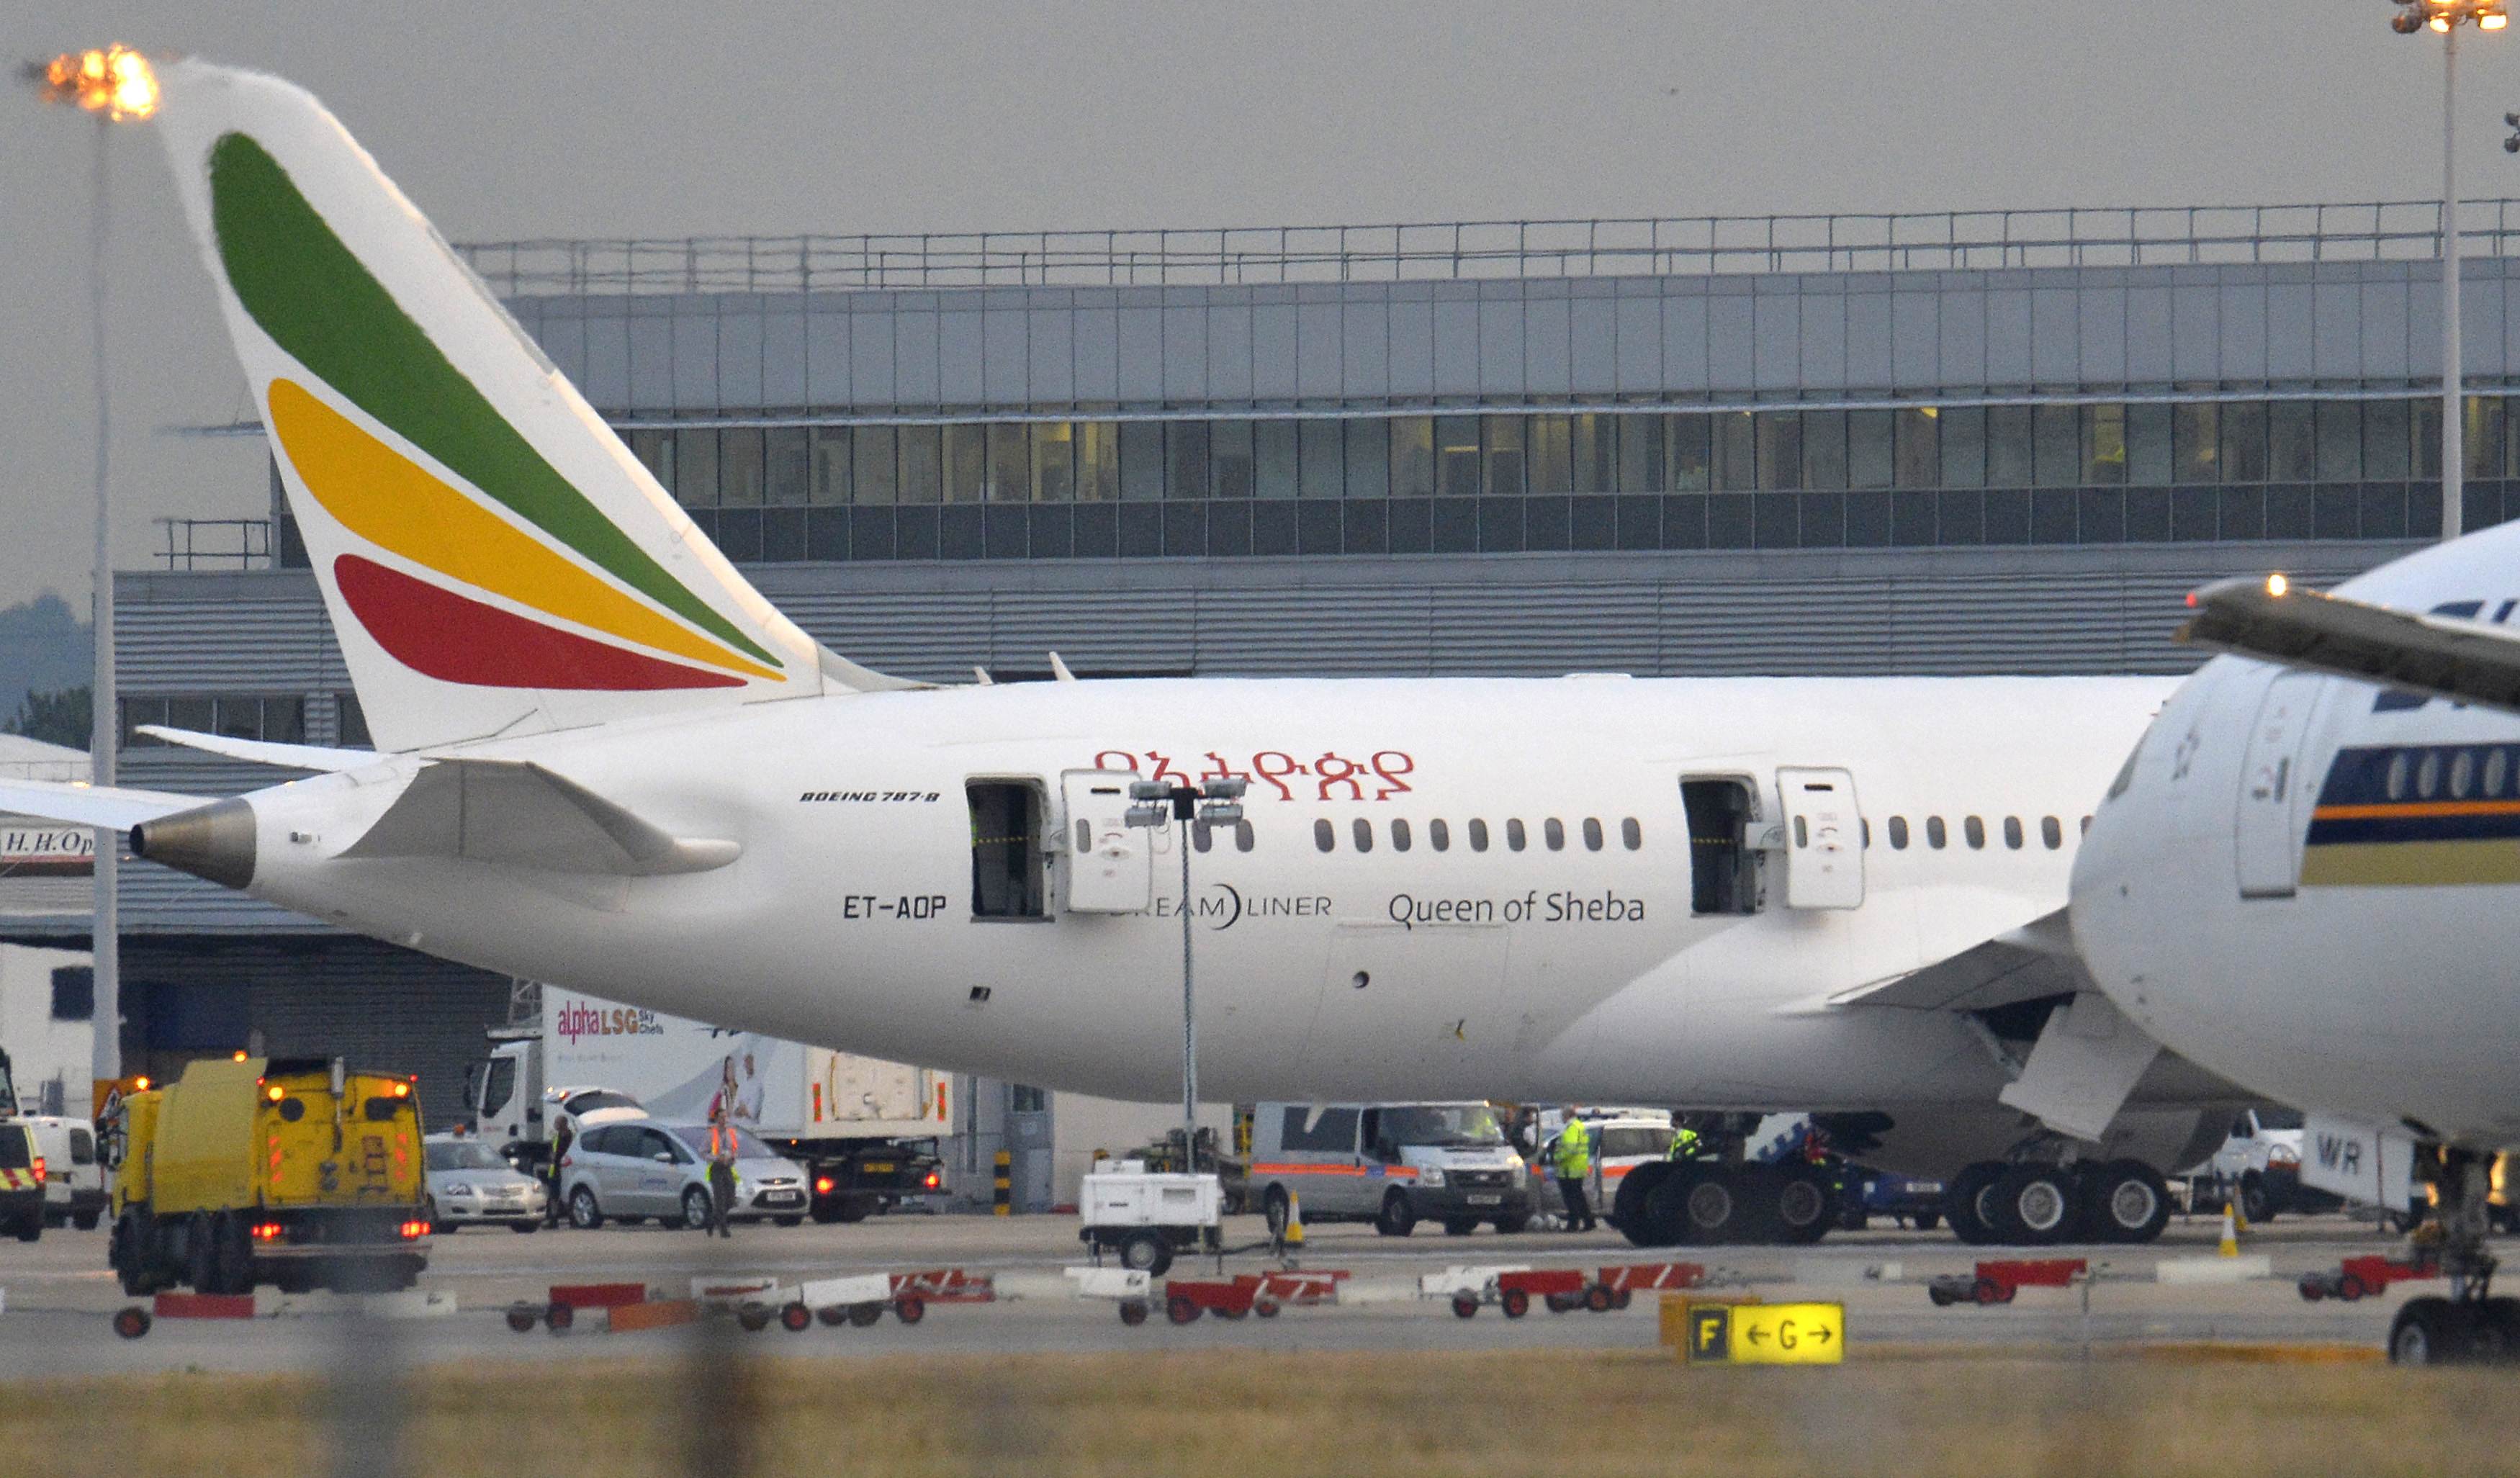 Emergency services attend a fire on an Ethiopian Airlines Dreamliner at Heathrow airport. Photo: Reuters